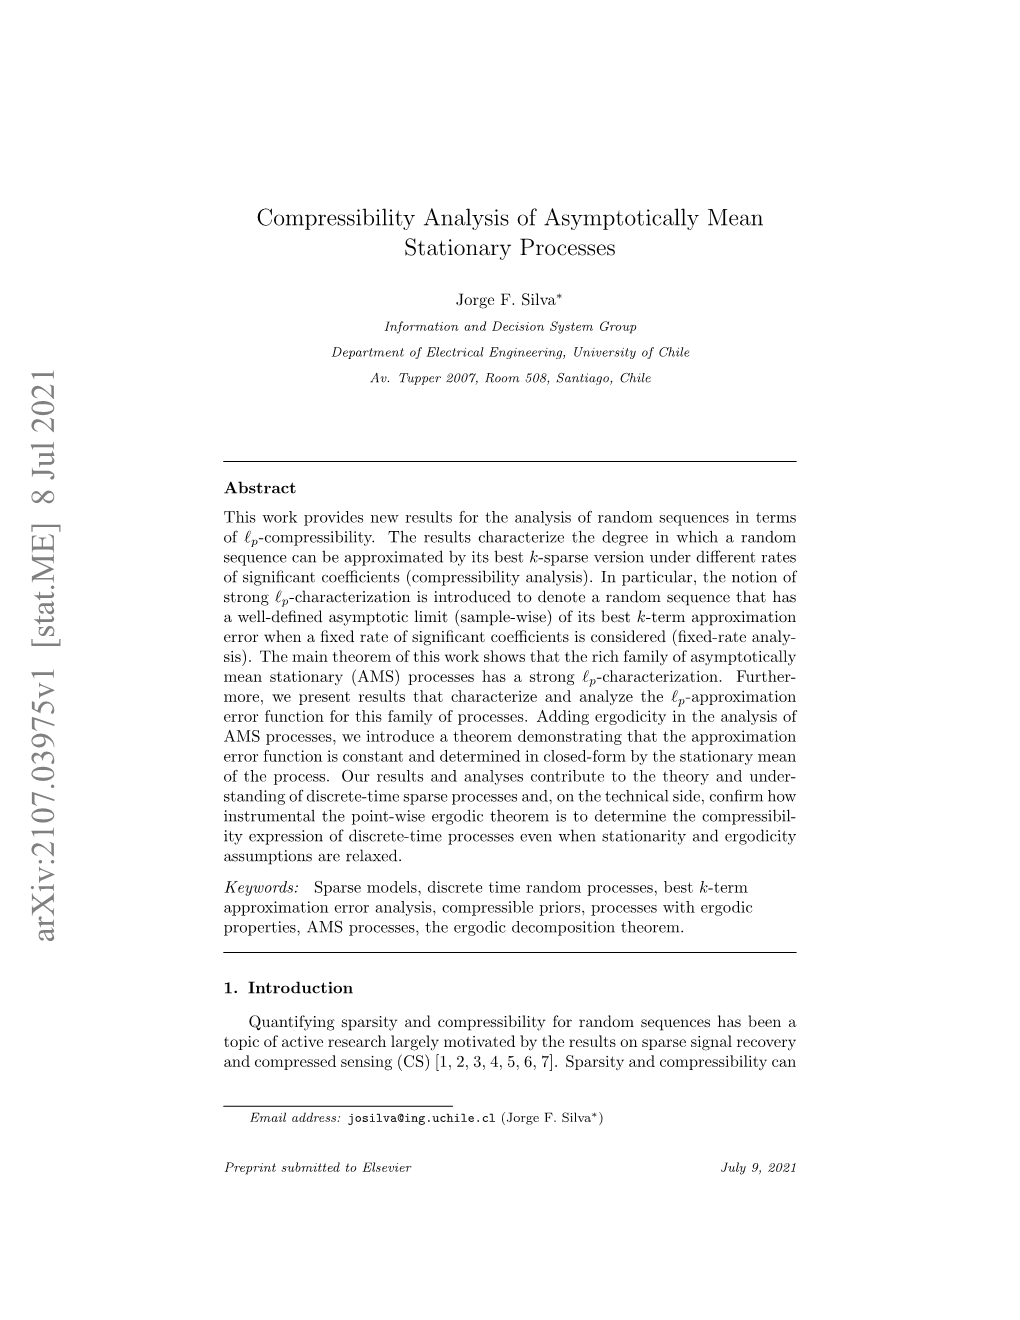 Compressibility Analysis of Asymptotically Mean Stationary Processes